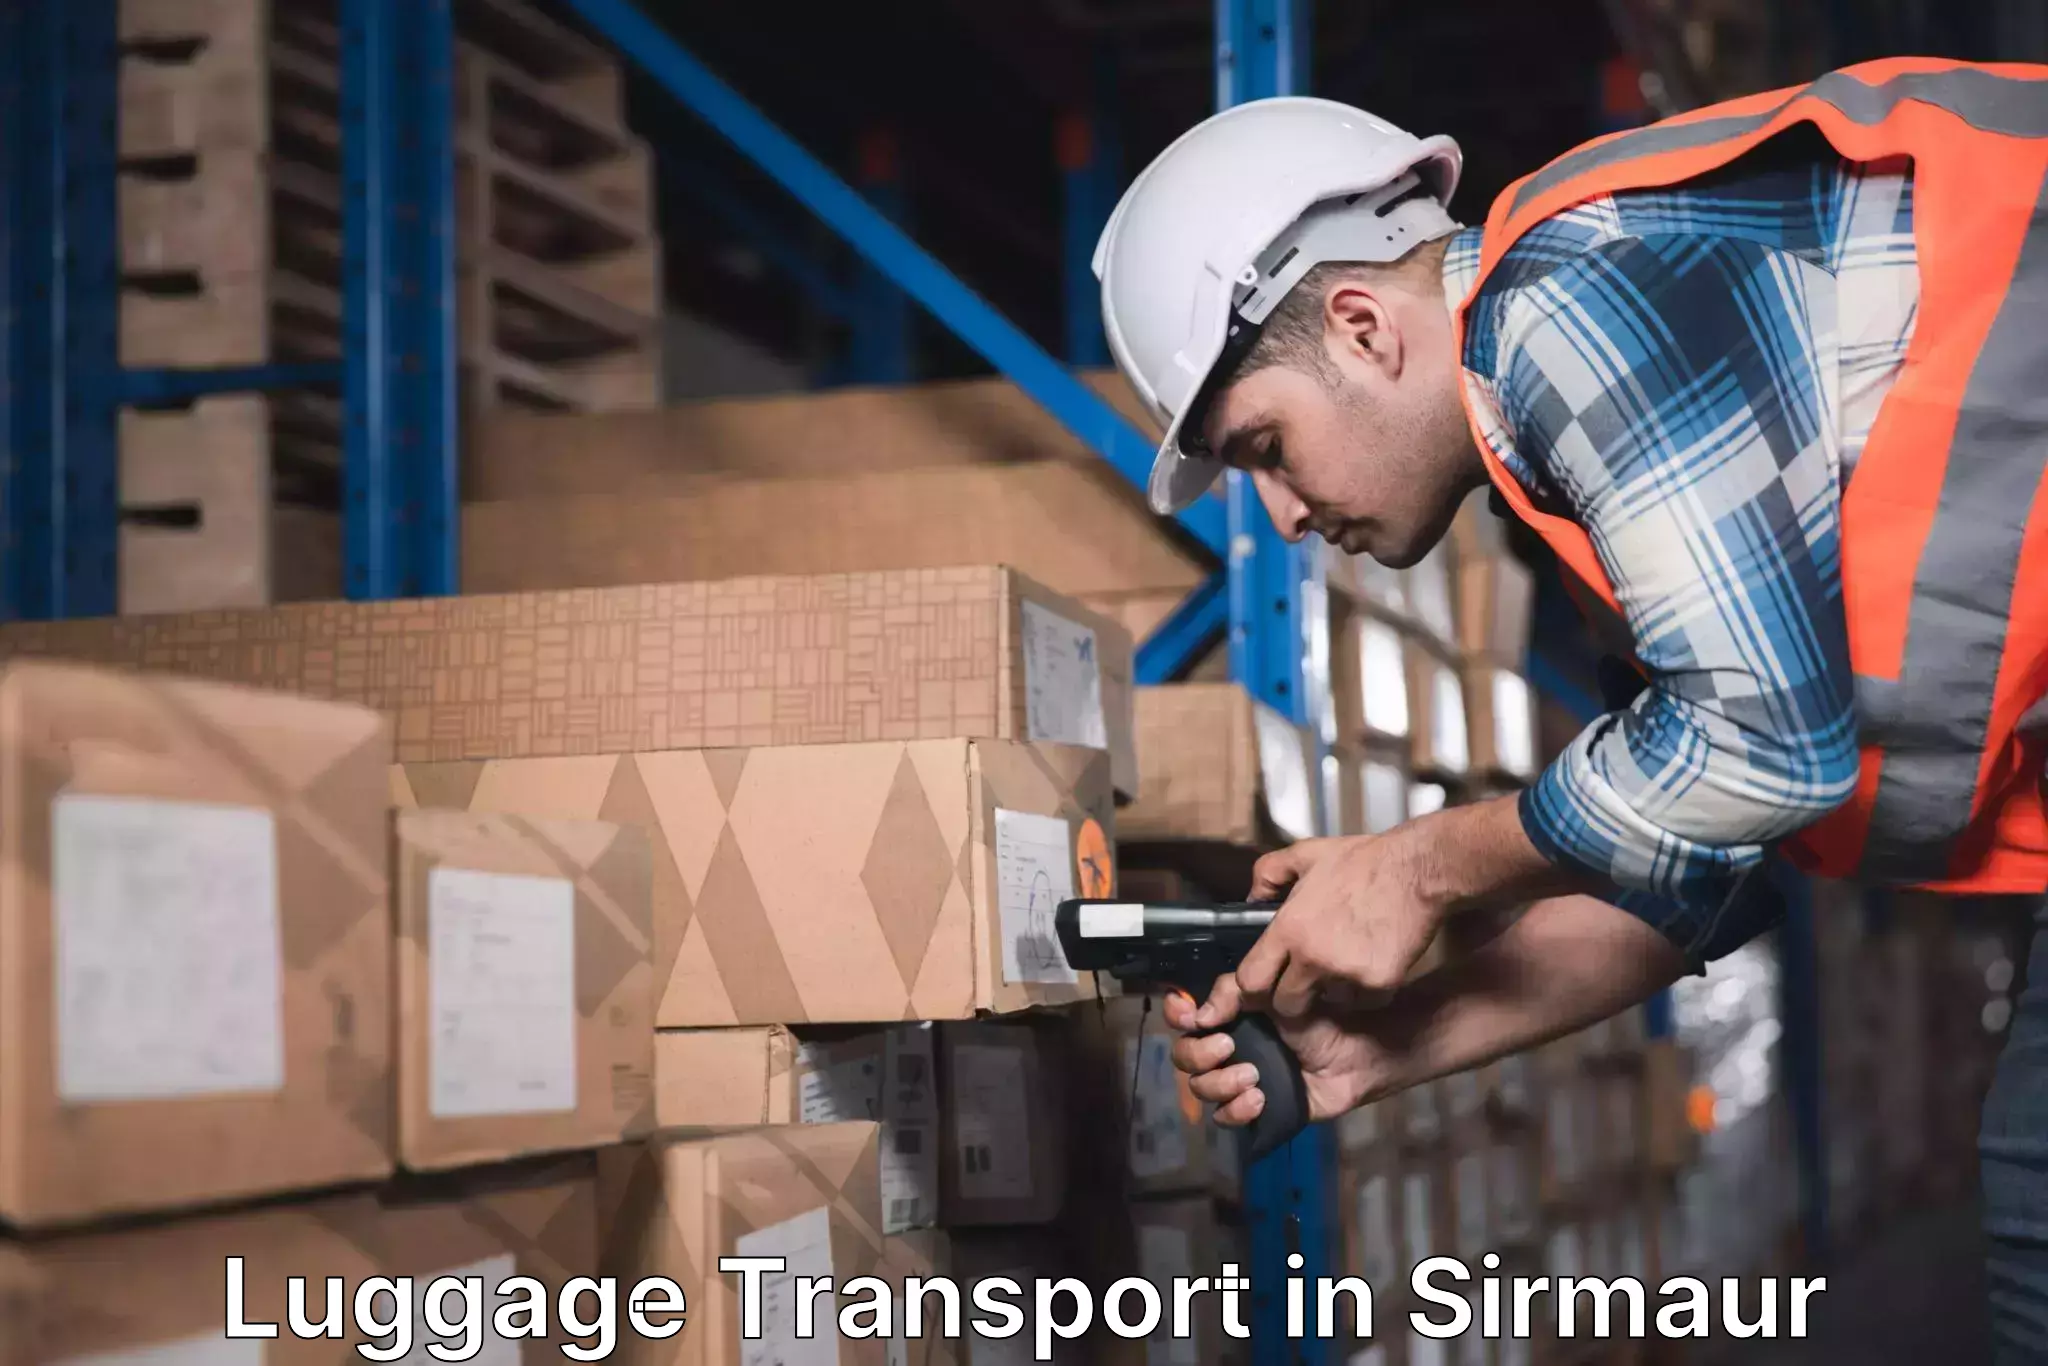 Luggage delivery system in Sirmaur